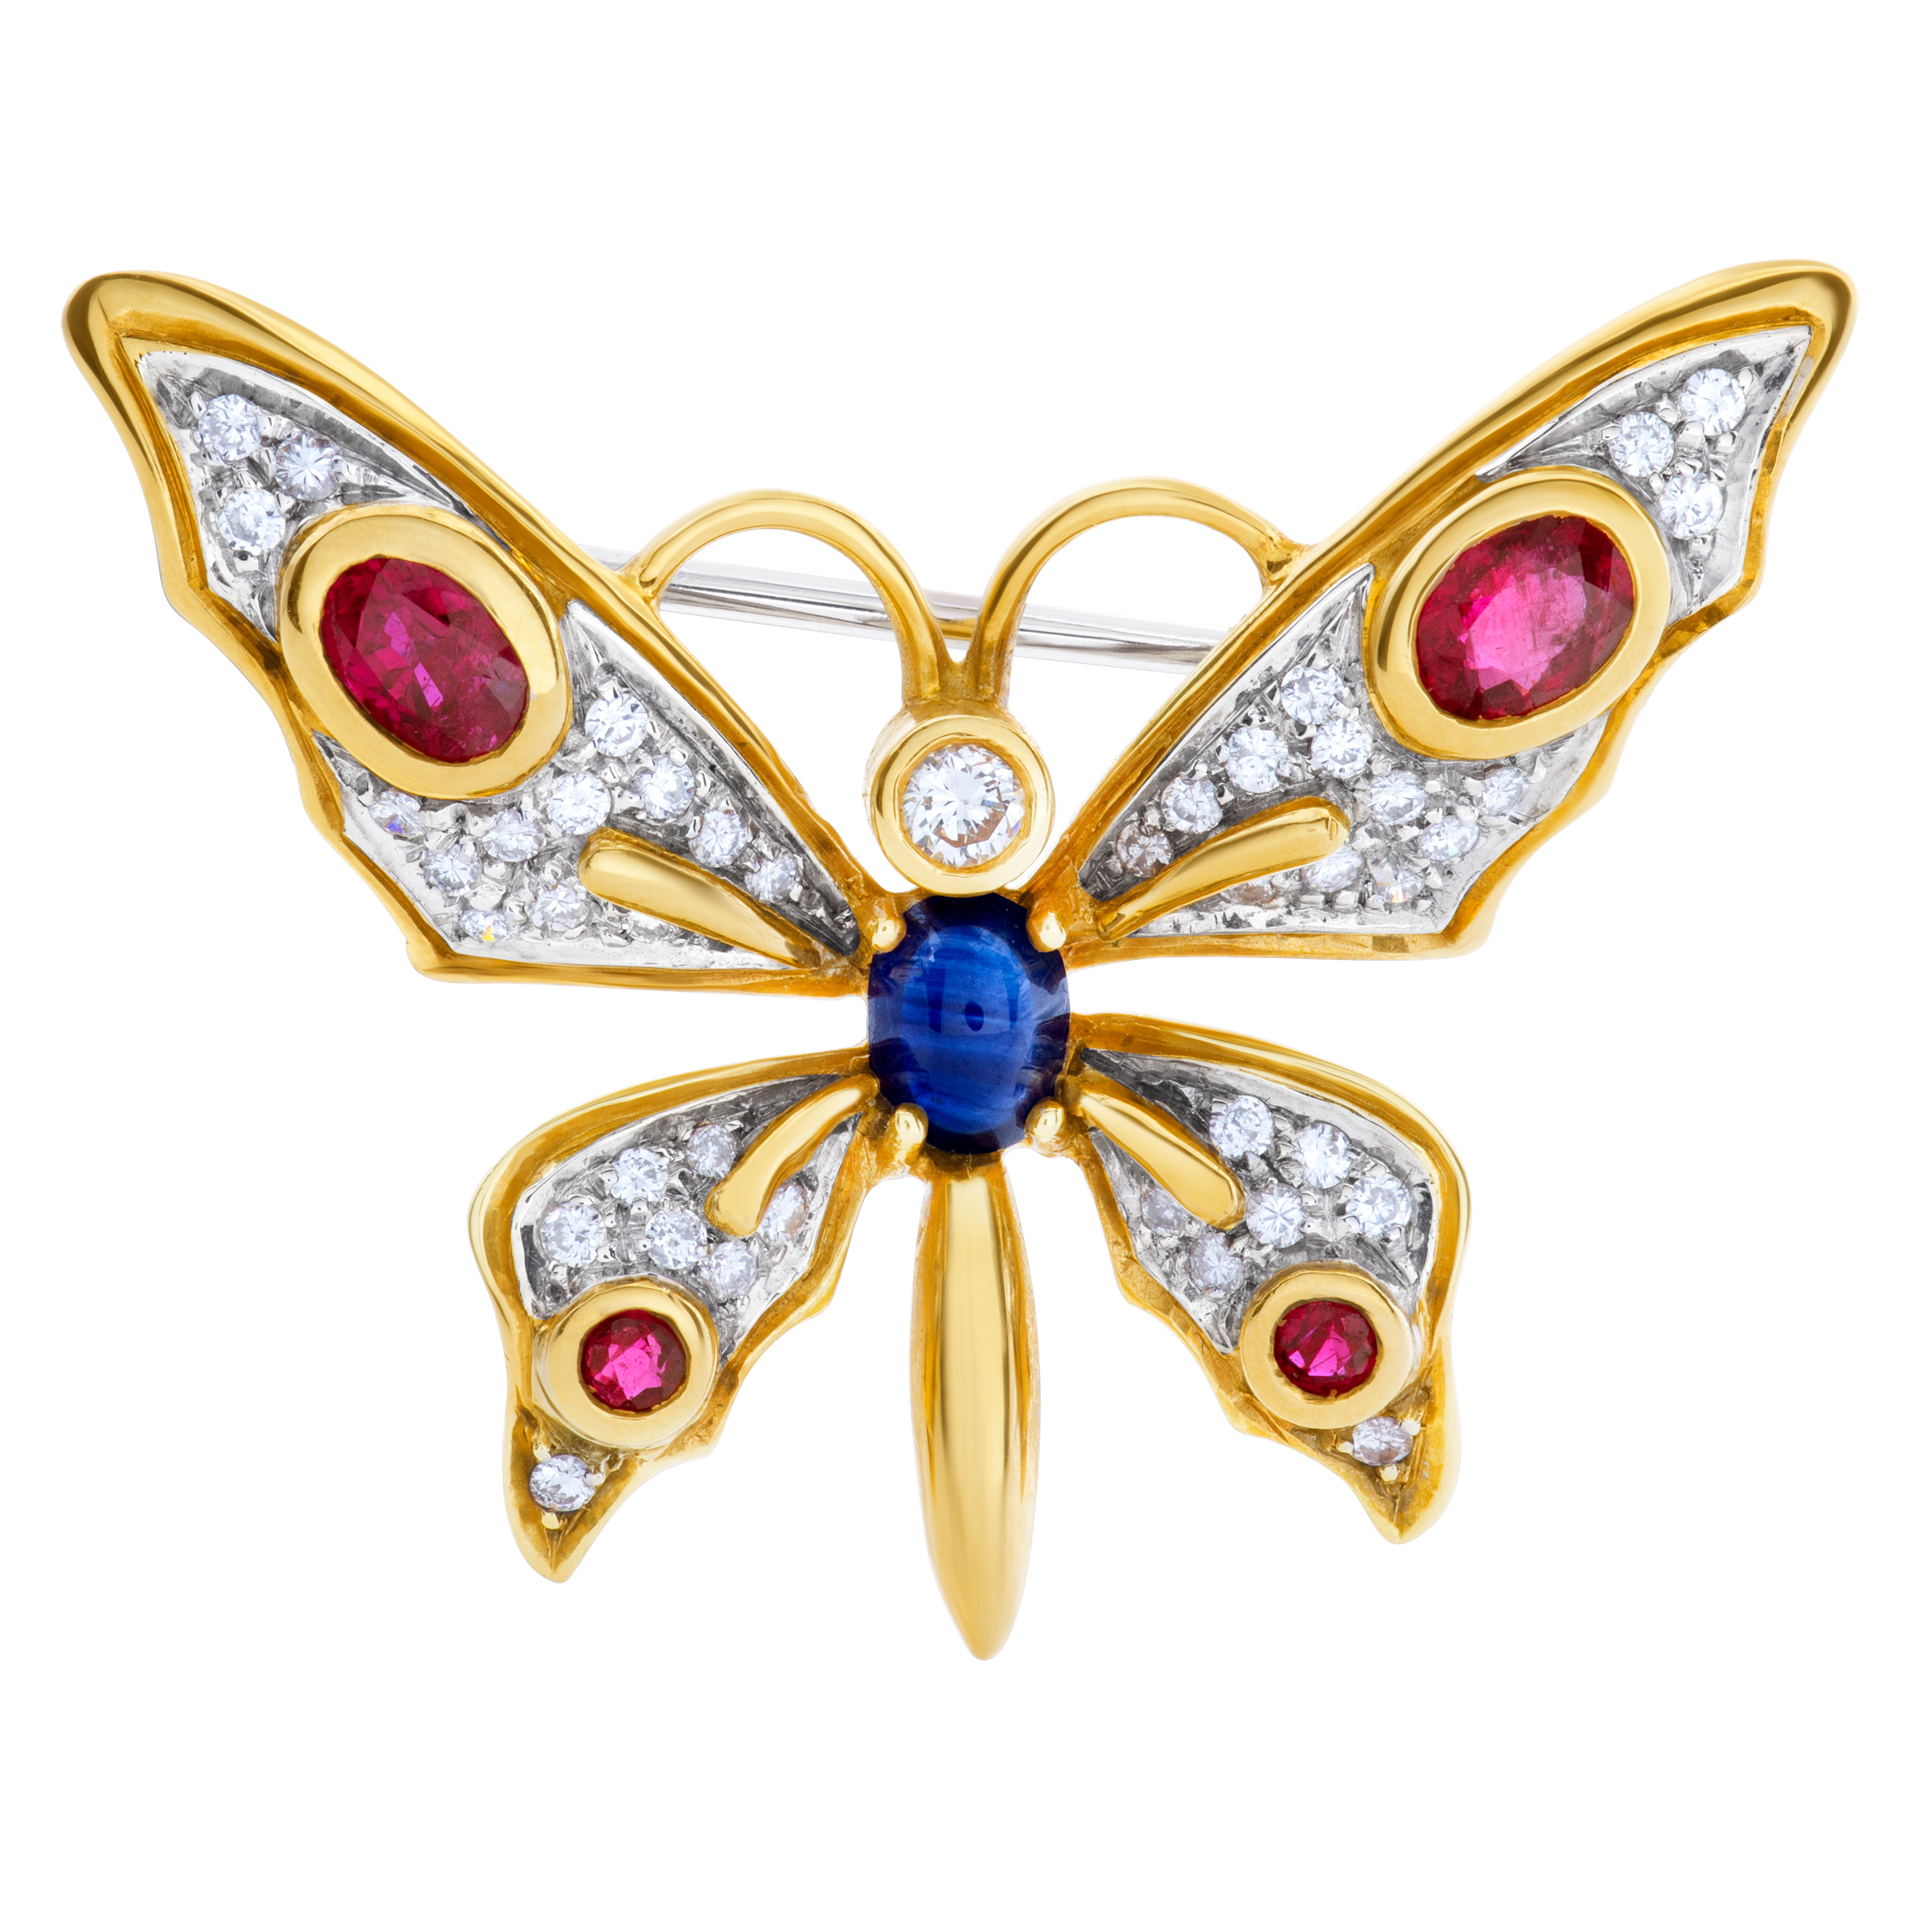 Designer signed "1925 AL" Butterfly pin with rubies, diamonds & cabochon sapphire